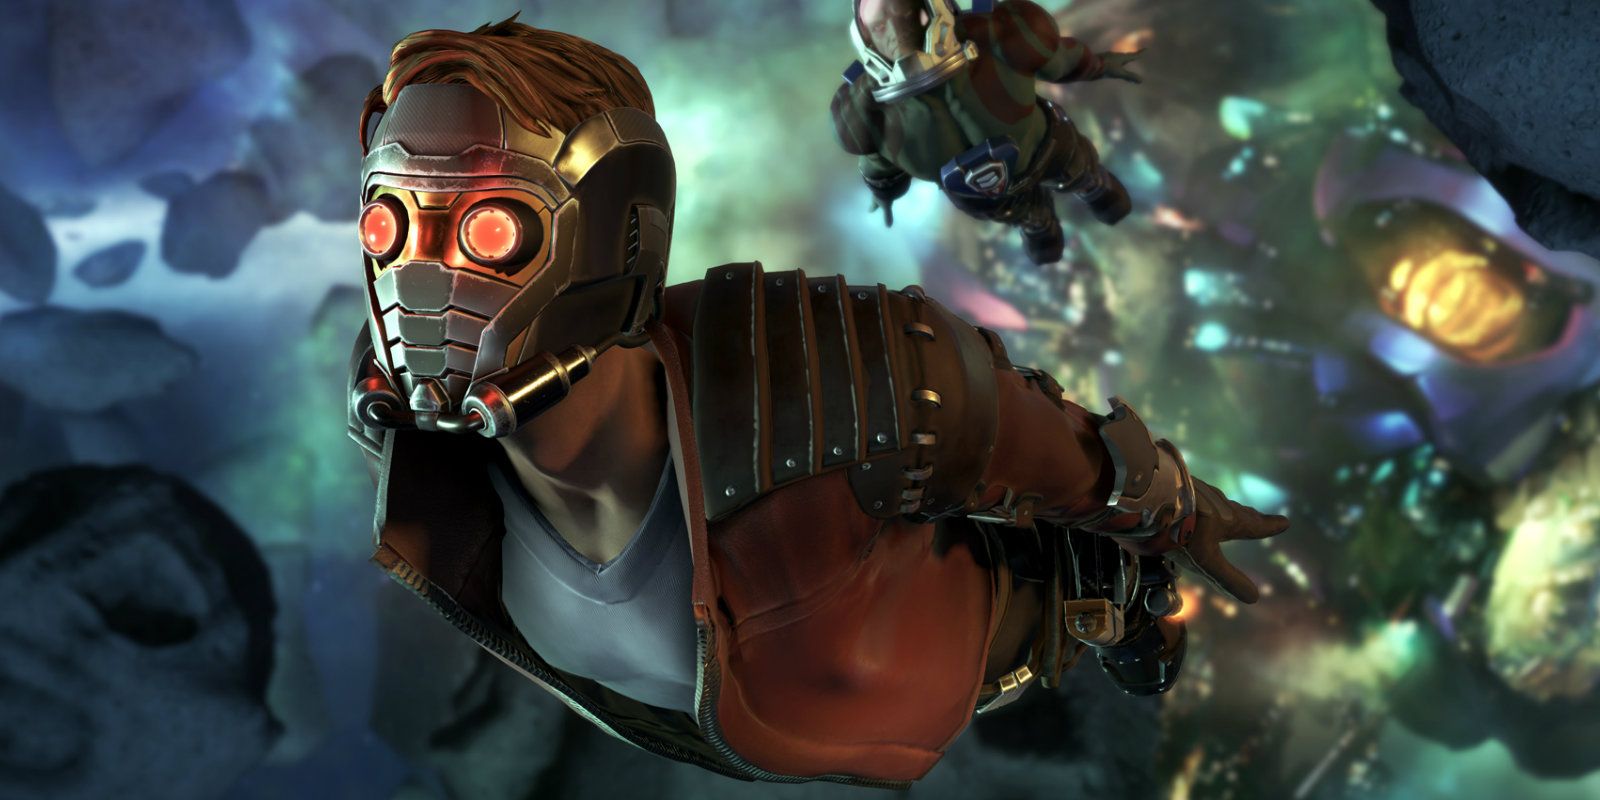 Star-Lord flies in space in the Guardians of the Galaxy: The Telltale Game.